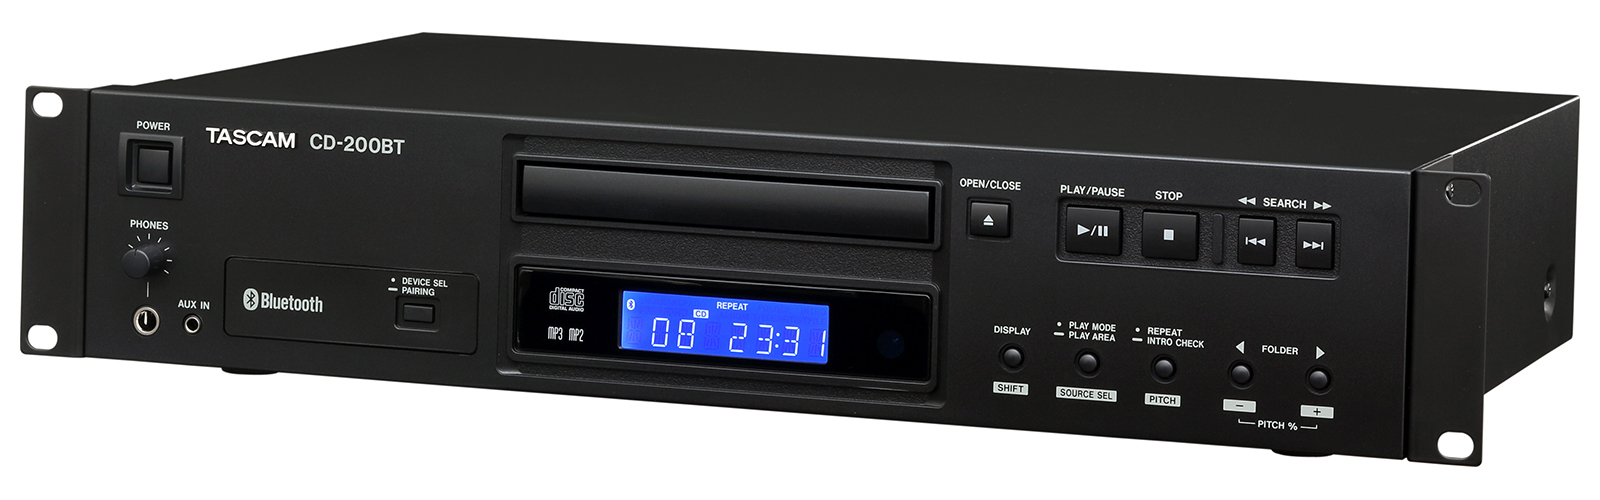 CD-200BT | Professional CD Player with Bluetooth Receiver | TASCAM 